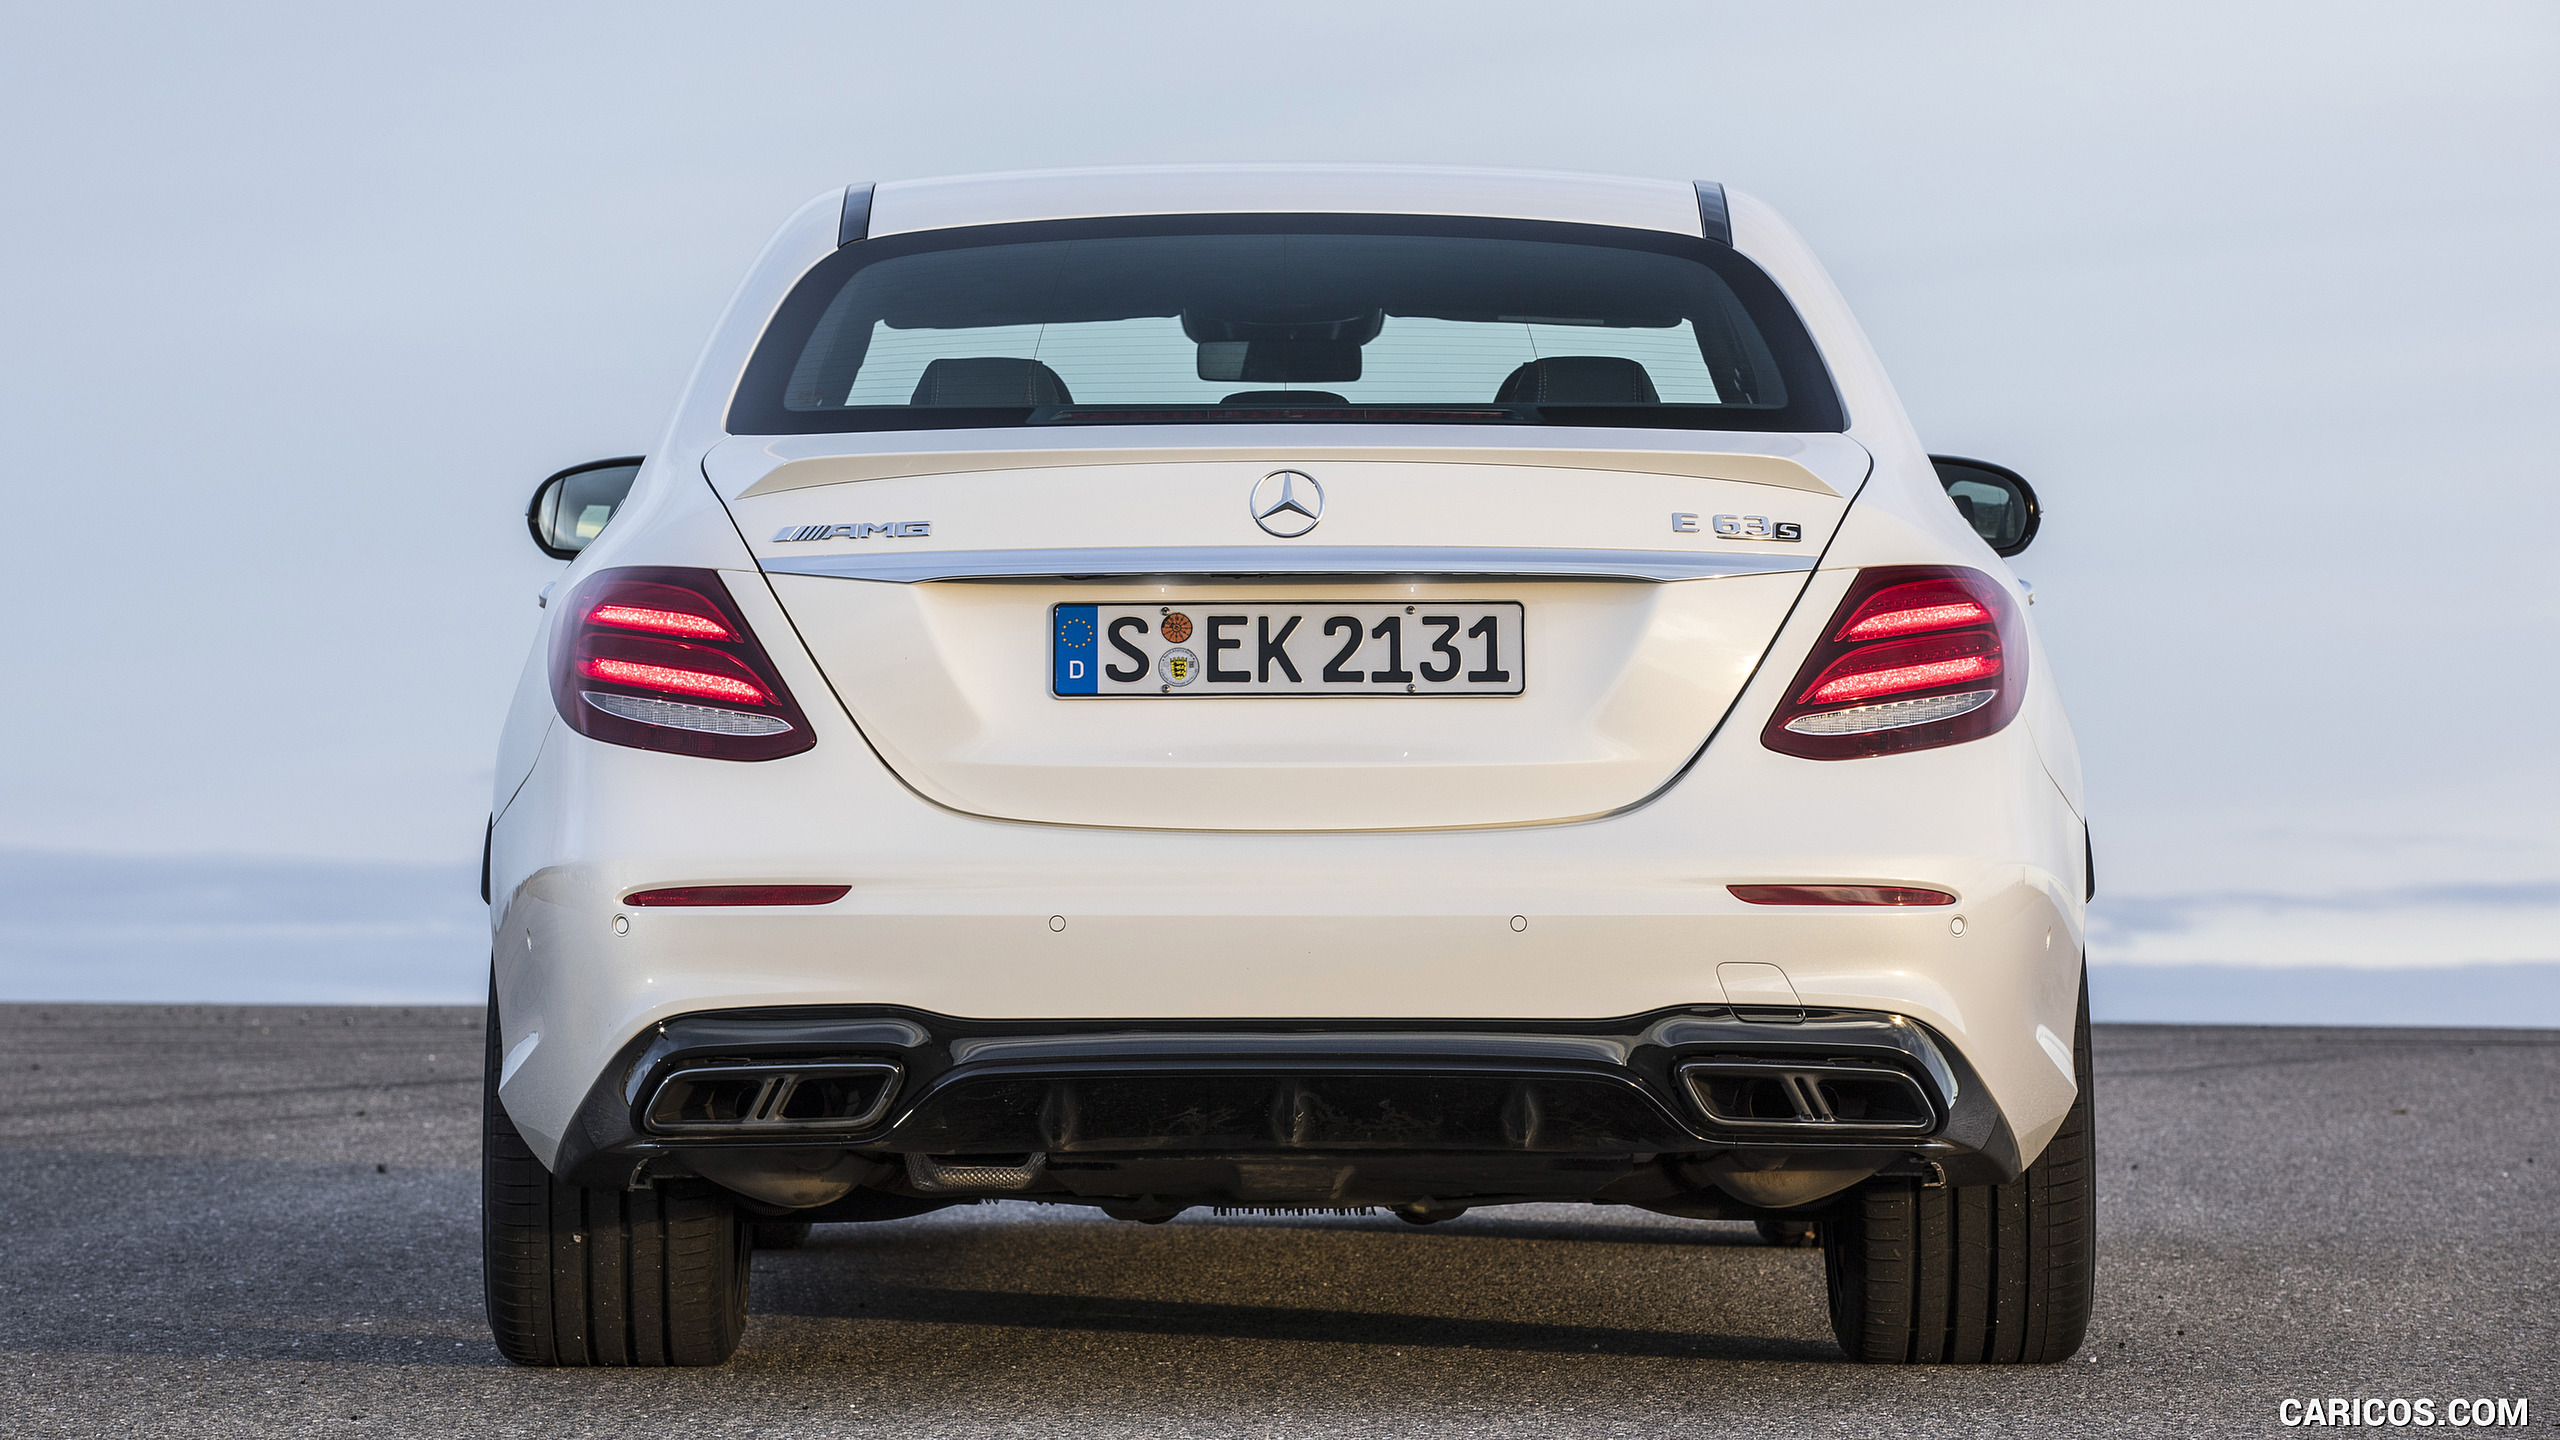 2018 Mercedes-AMG E63 S 4MATIC+ - Rear, #130 of 323